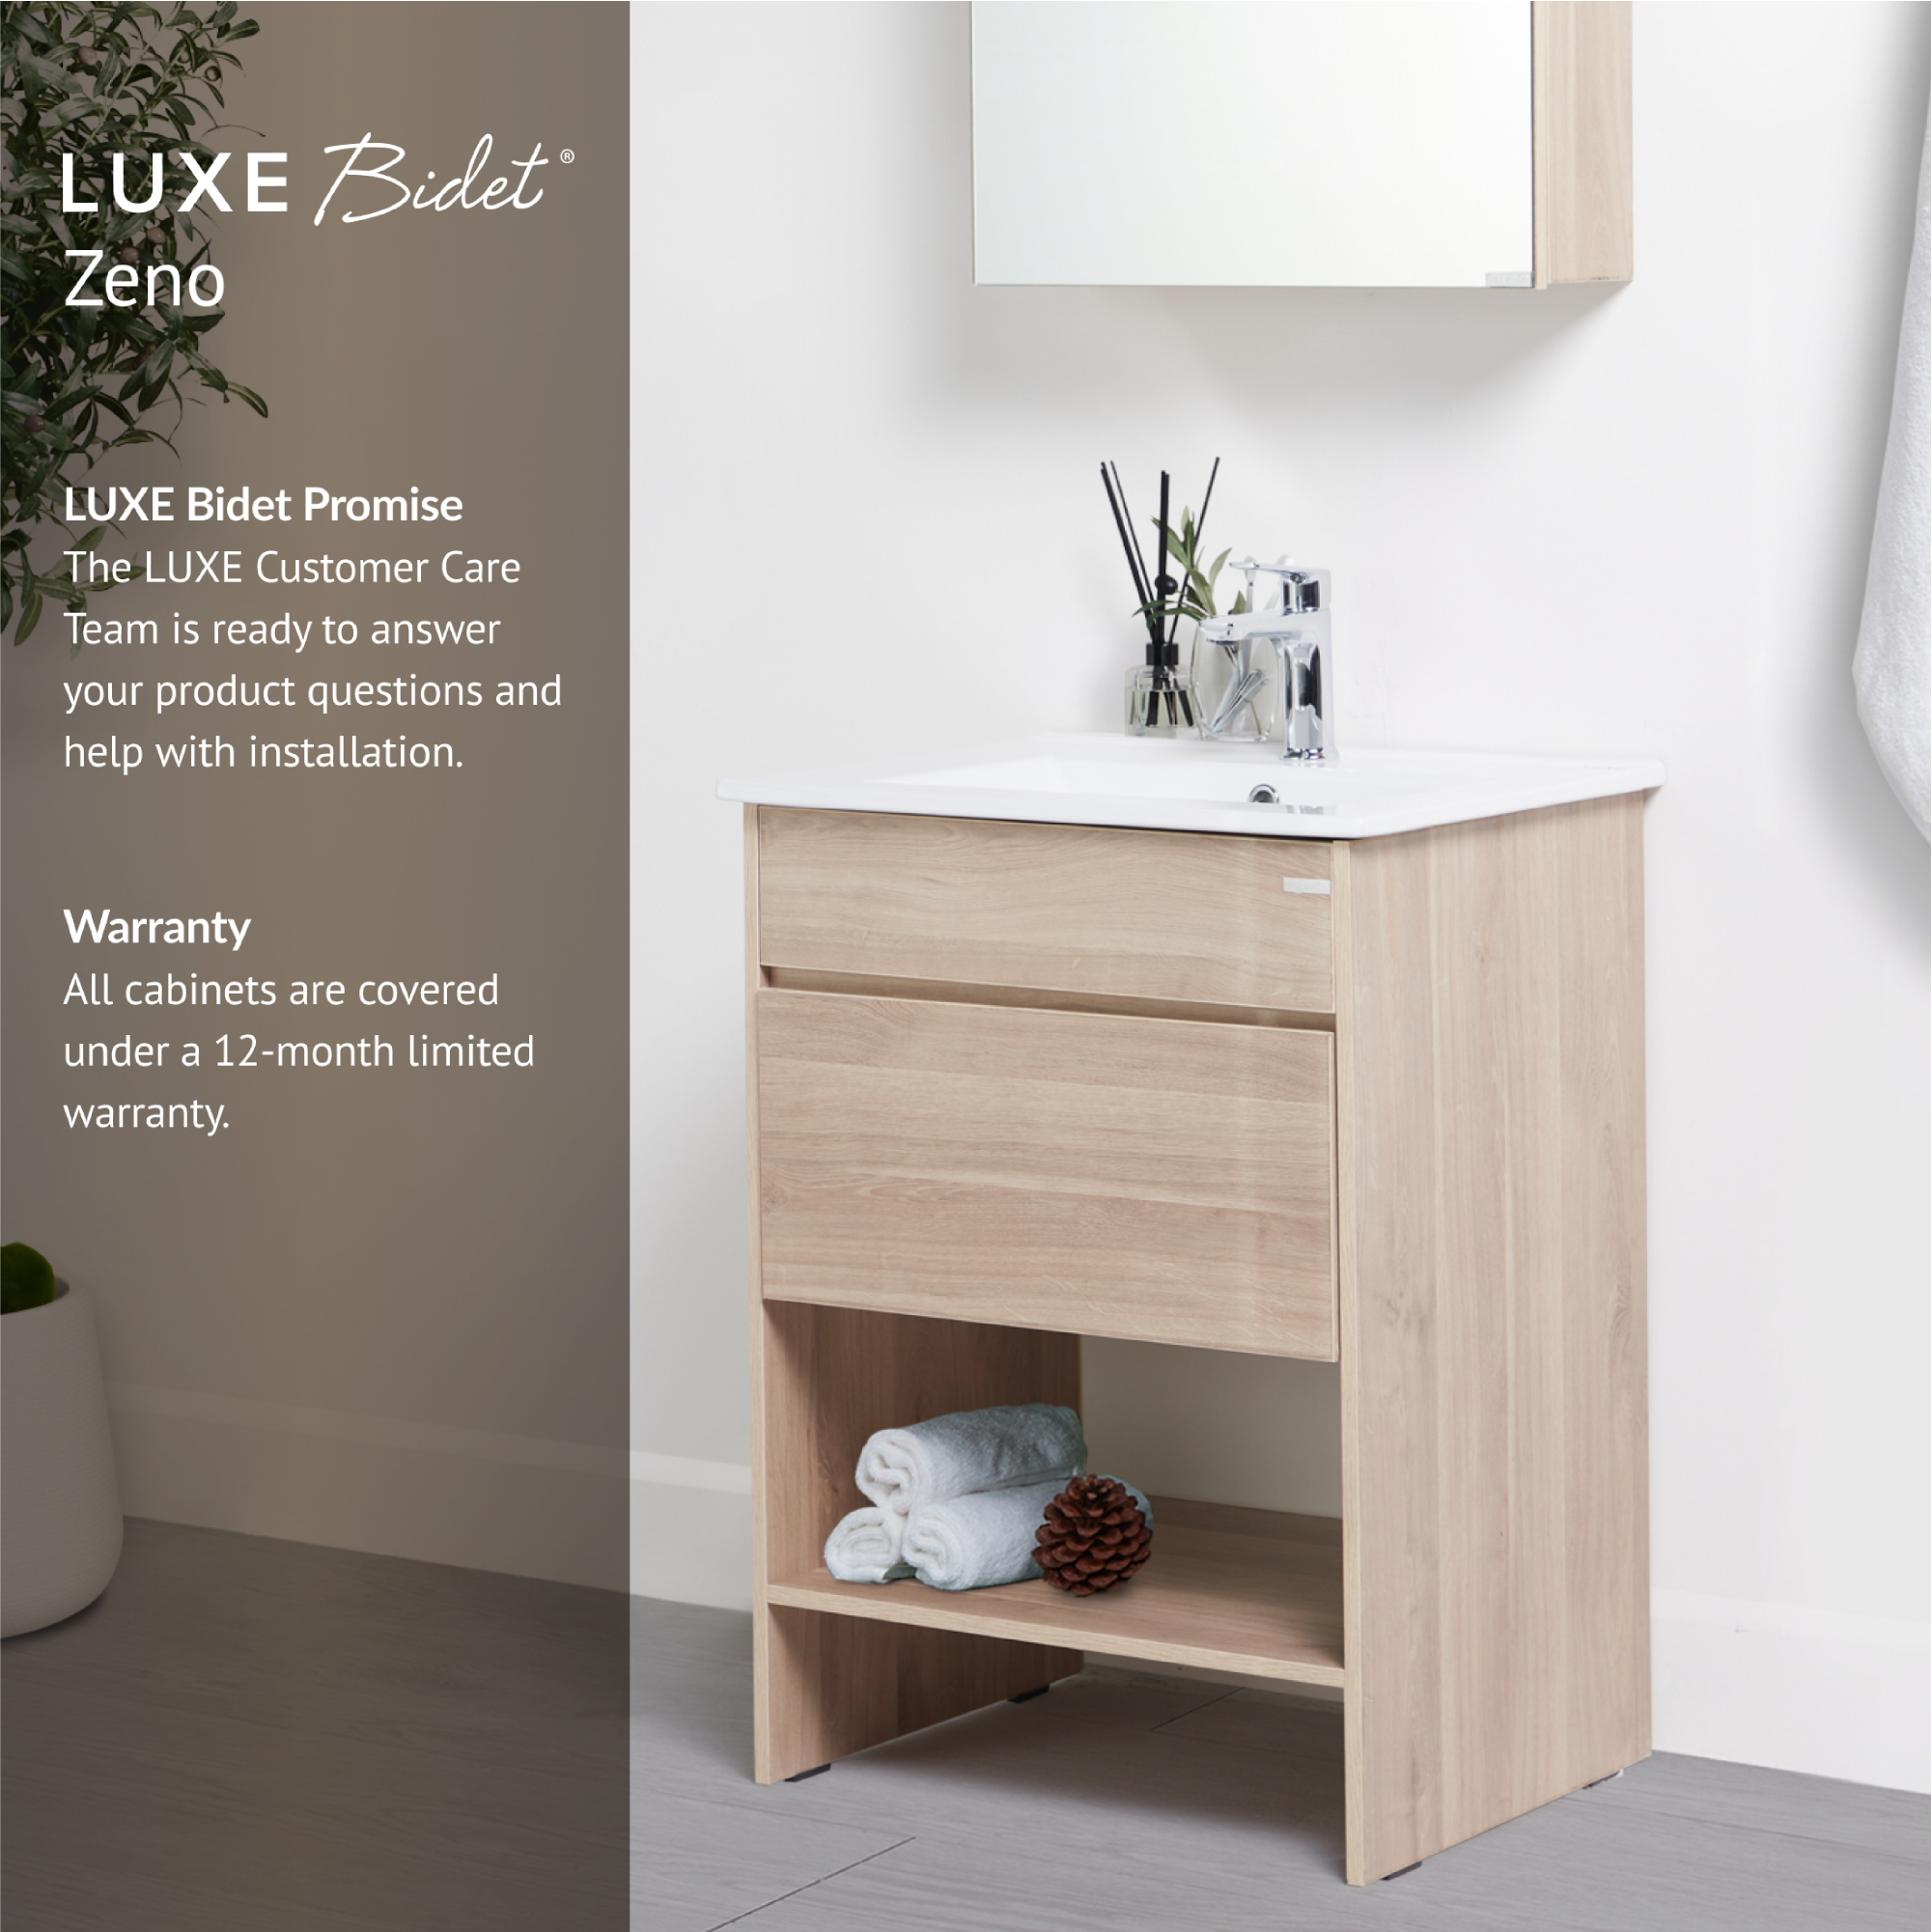 Zeno Bathroom Vanity Set is backed by the LUXE Bidet Promise and comes with a 12-month limited warranty.